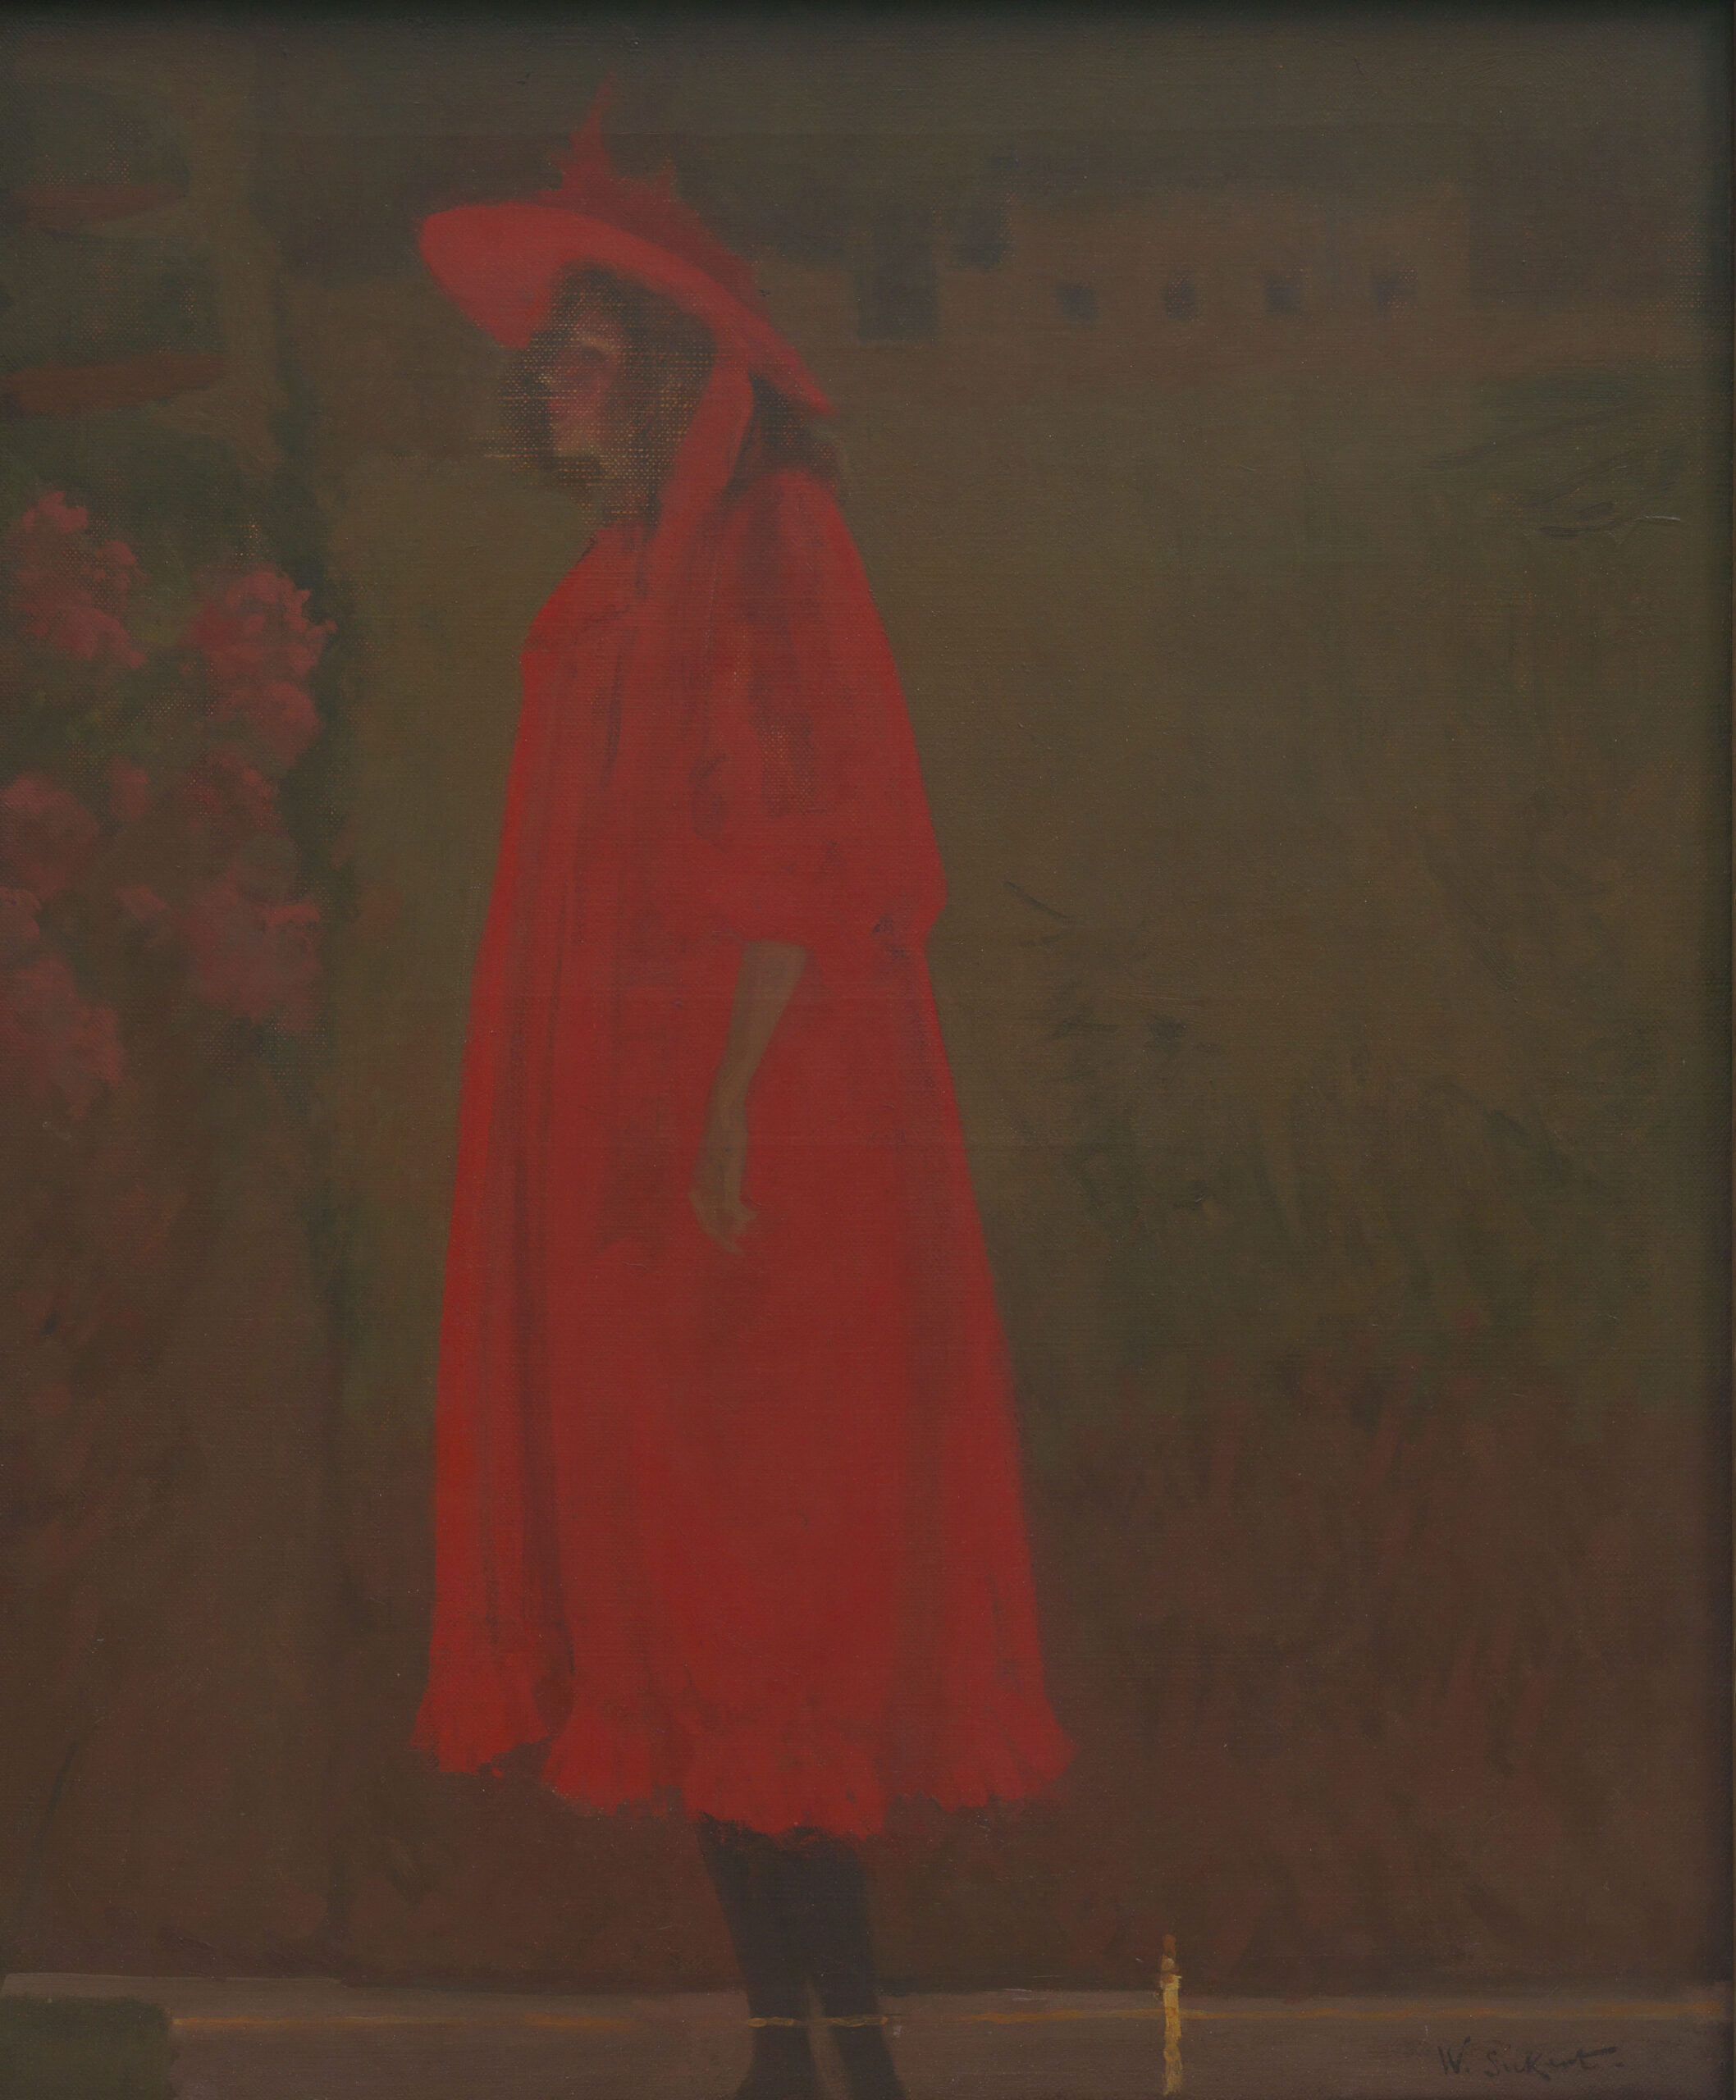 Walter Richard Sickert, Minnie Cunningham at the Old Bedford, 1892, Tate © 2022 Tate Images